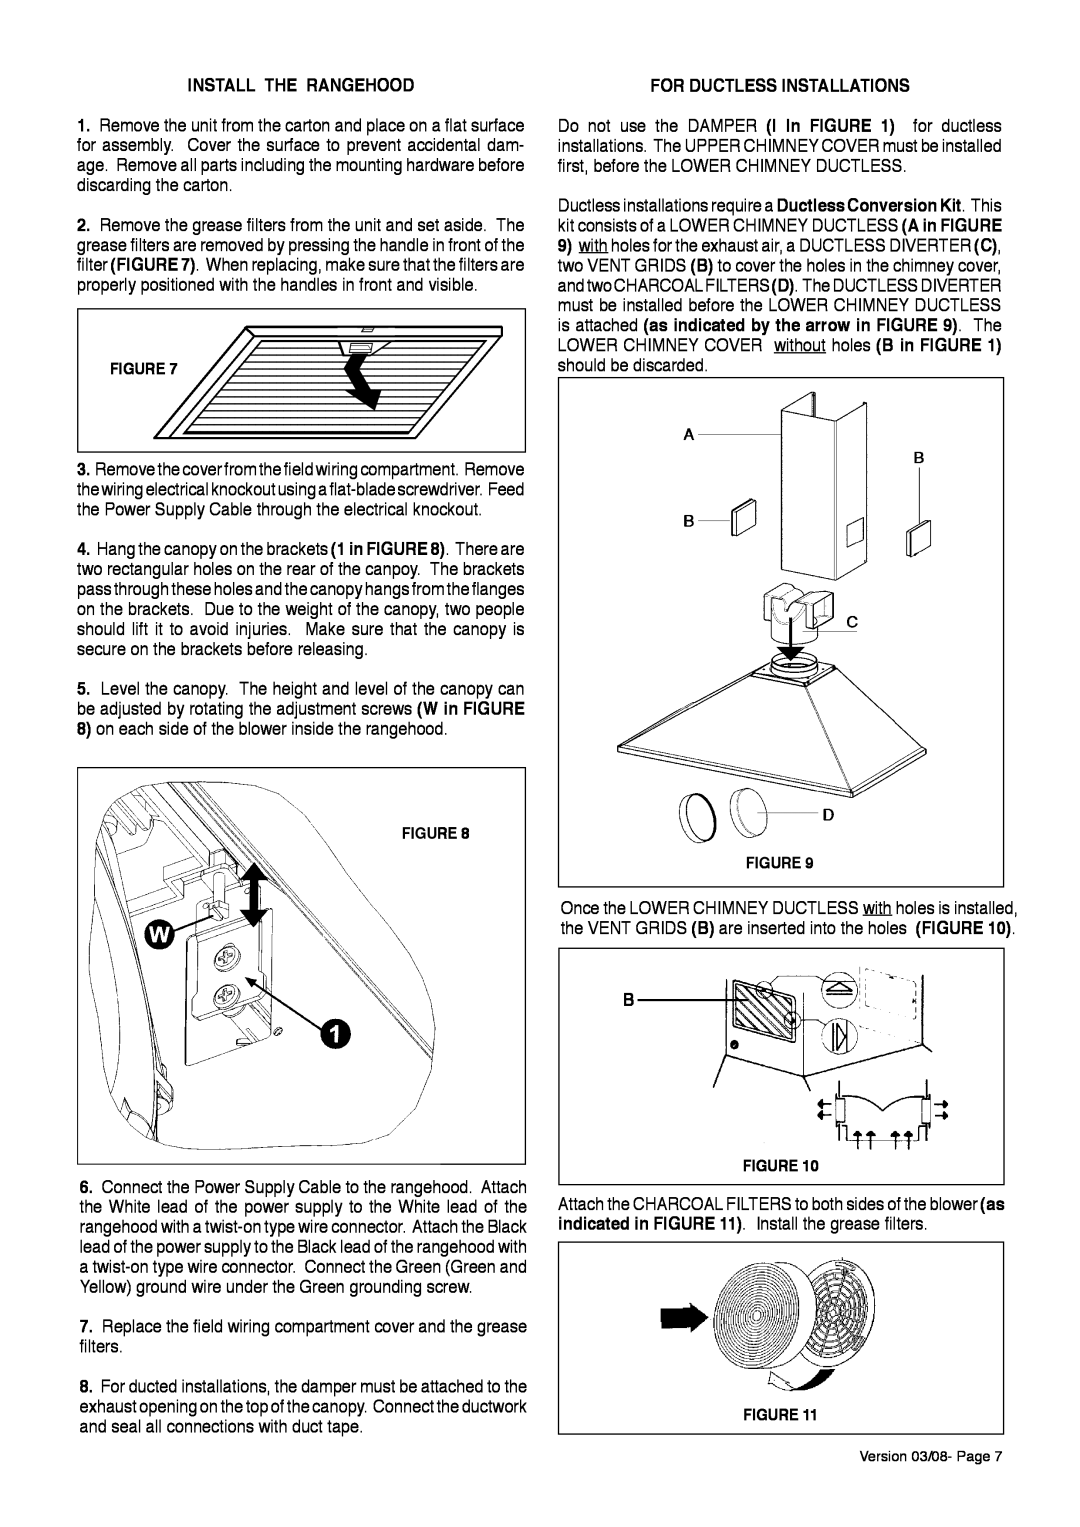 Faber 280 CFM, 500 CFM installation instructions Install The Rangehood, For Ductless Installations 